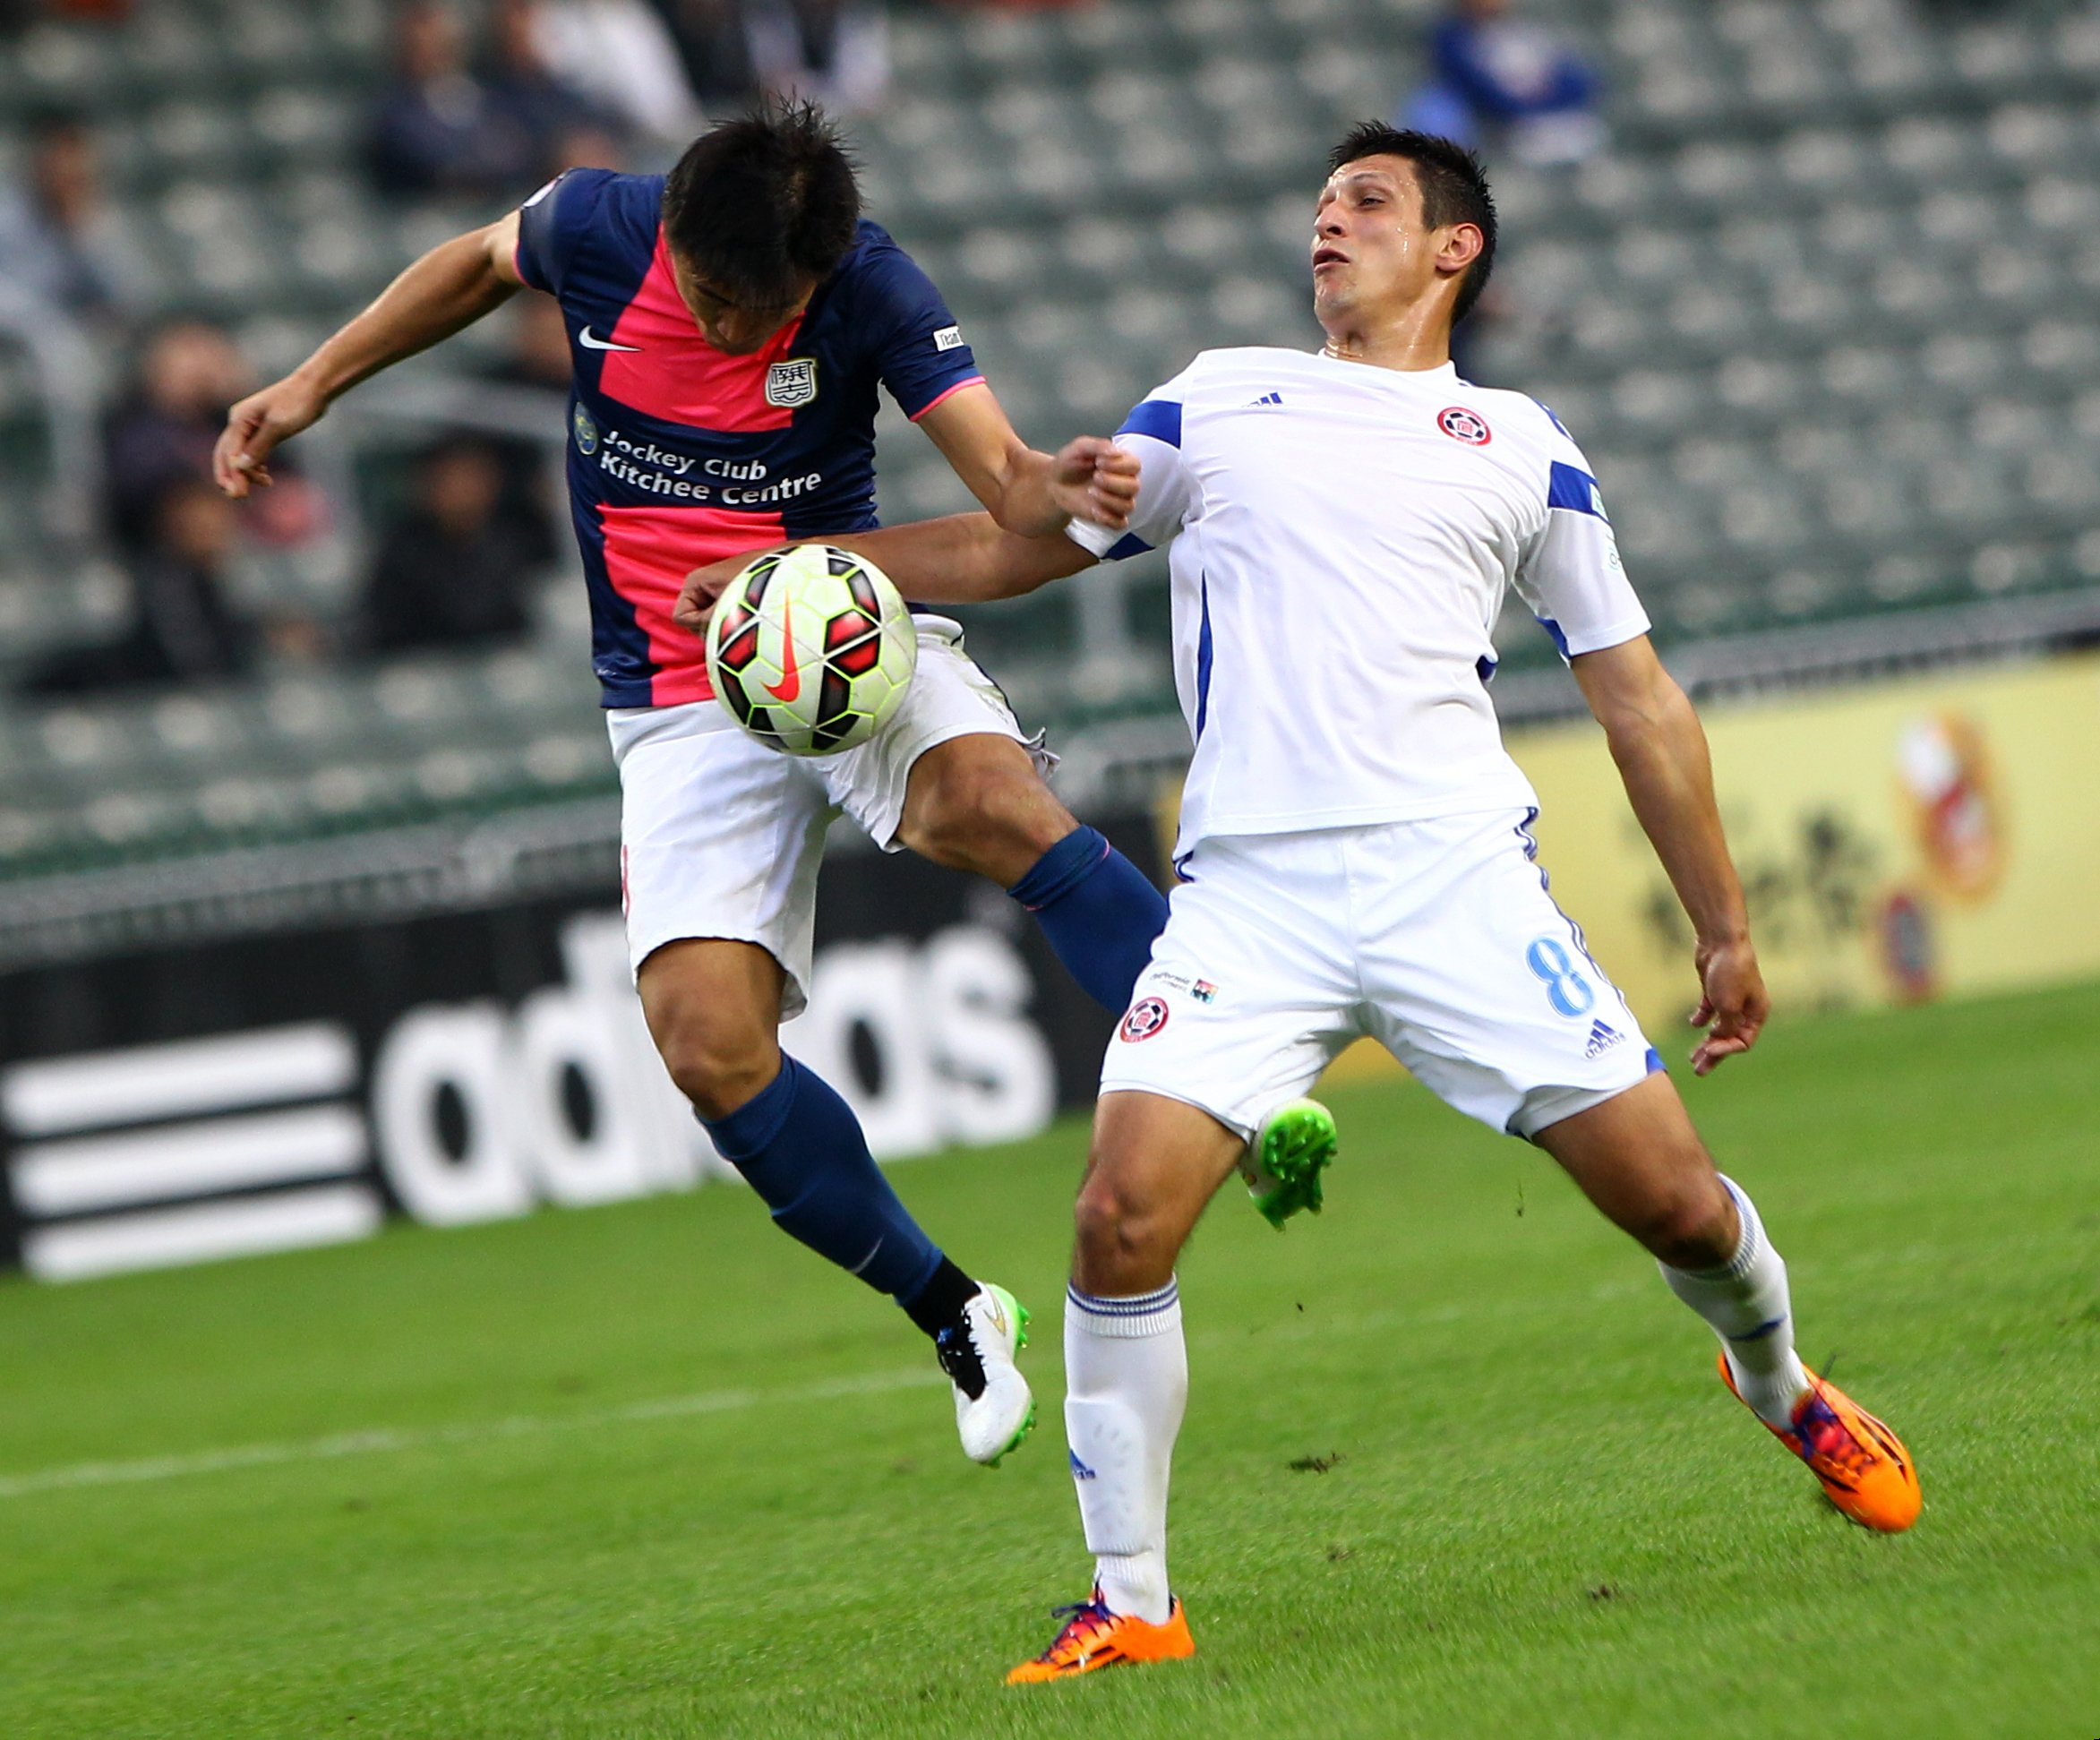 Eastern beat Kitchee in the final of the Soccer Senior Shield earlier this year. Photo: Dickson Lee